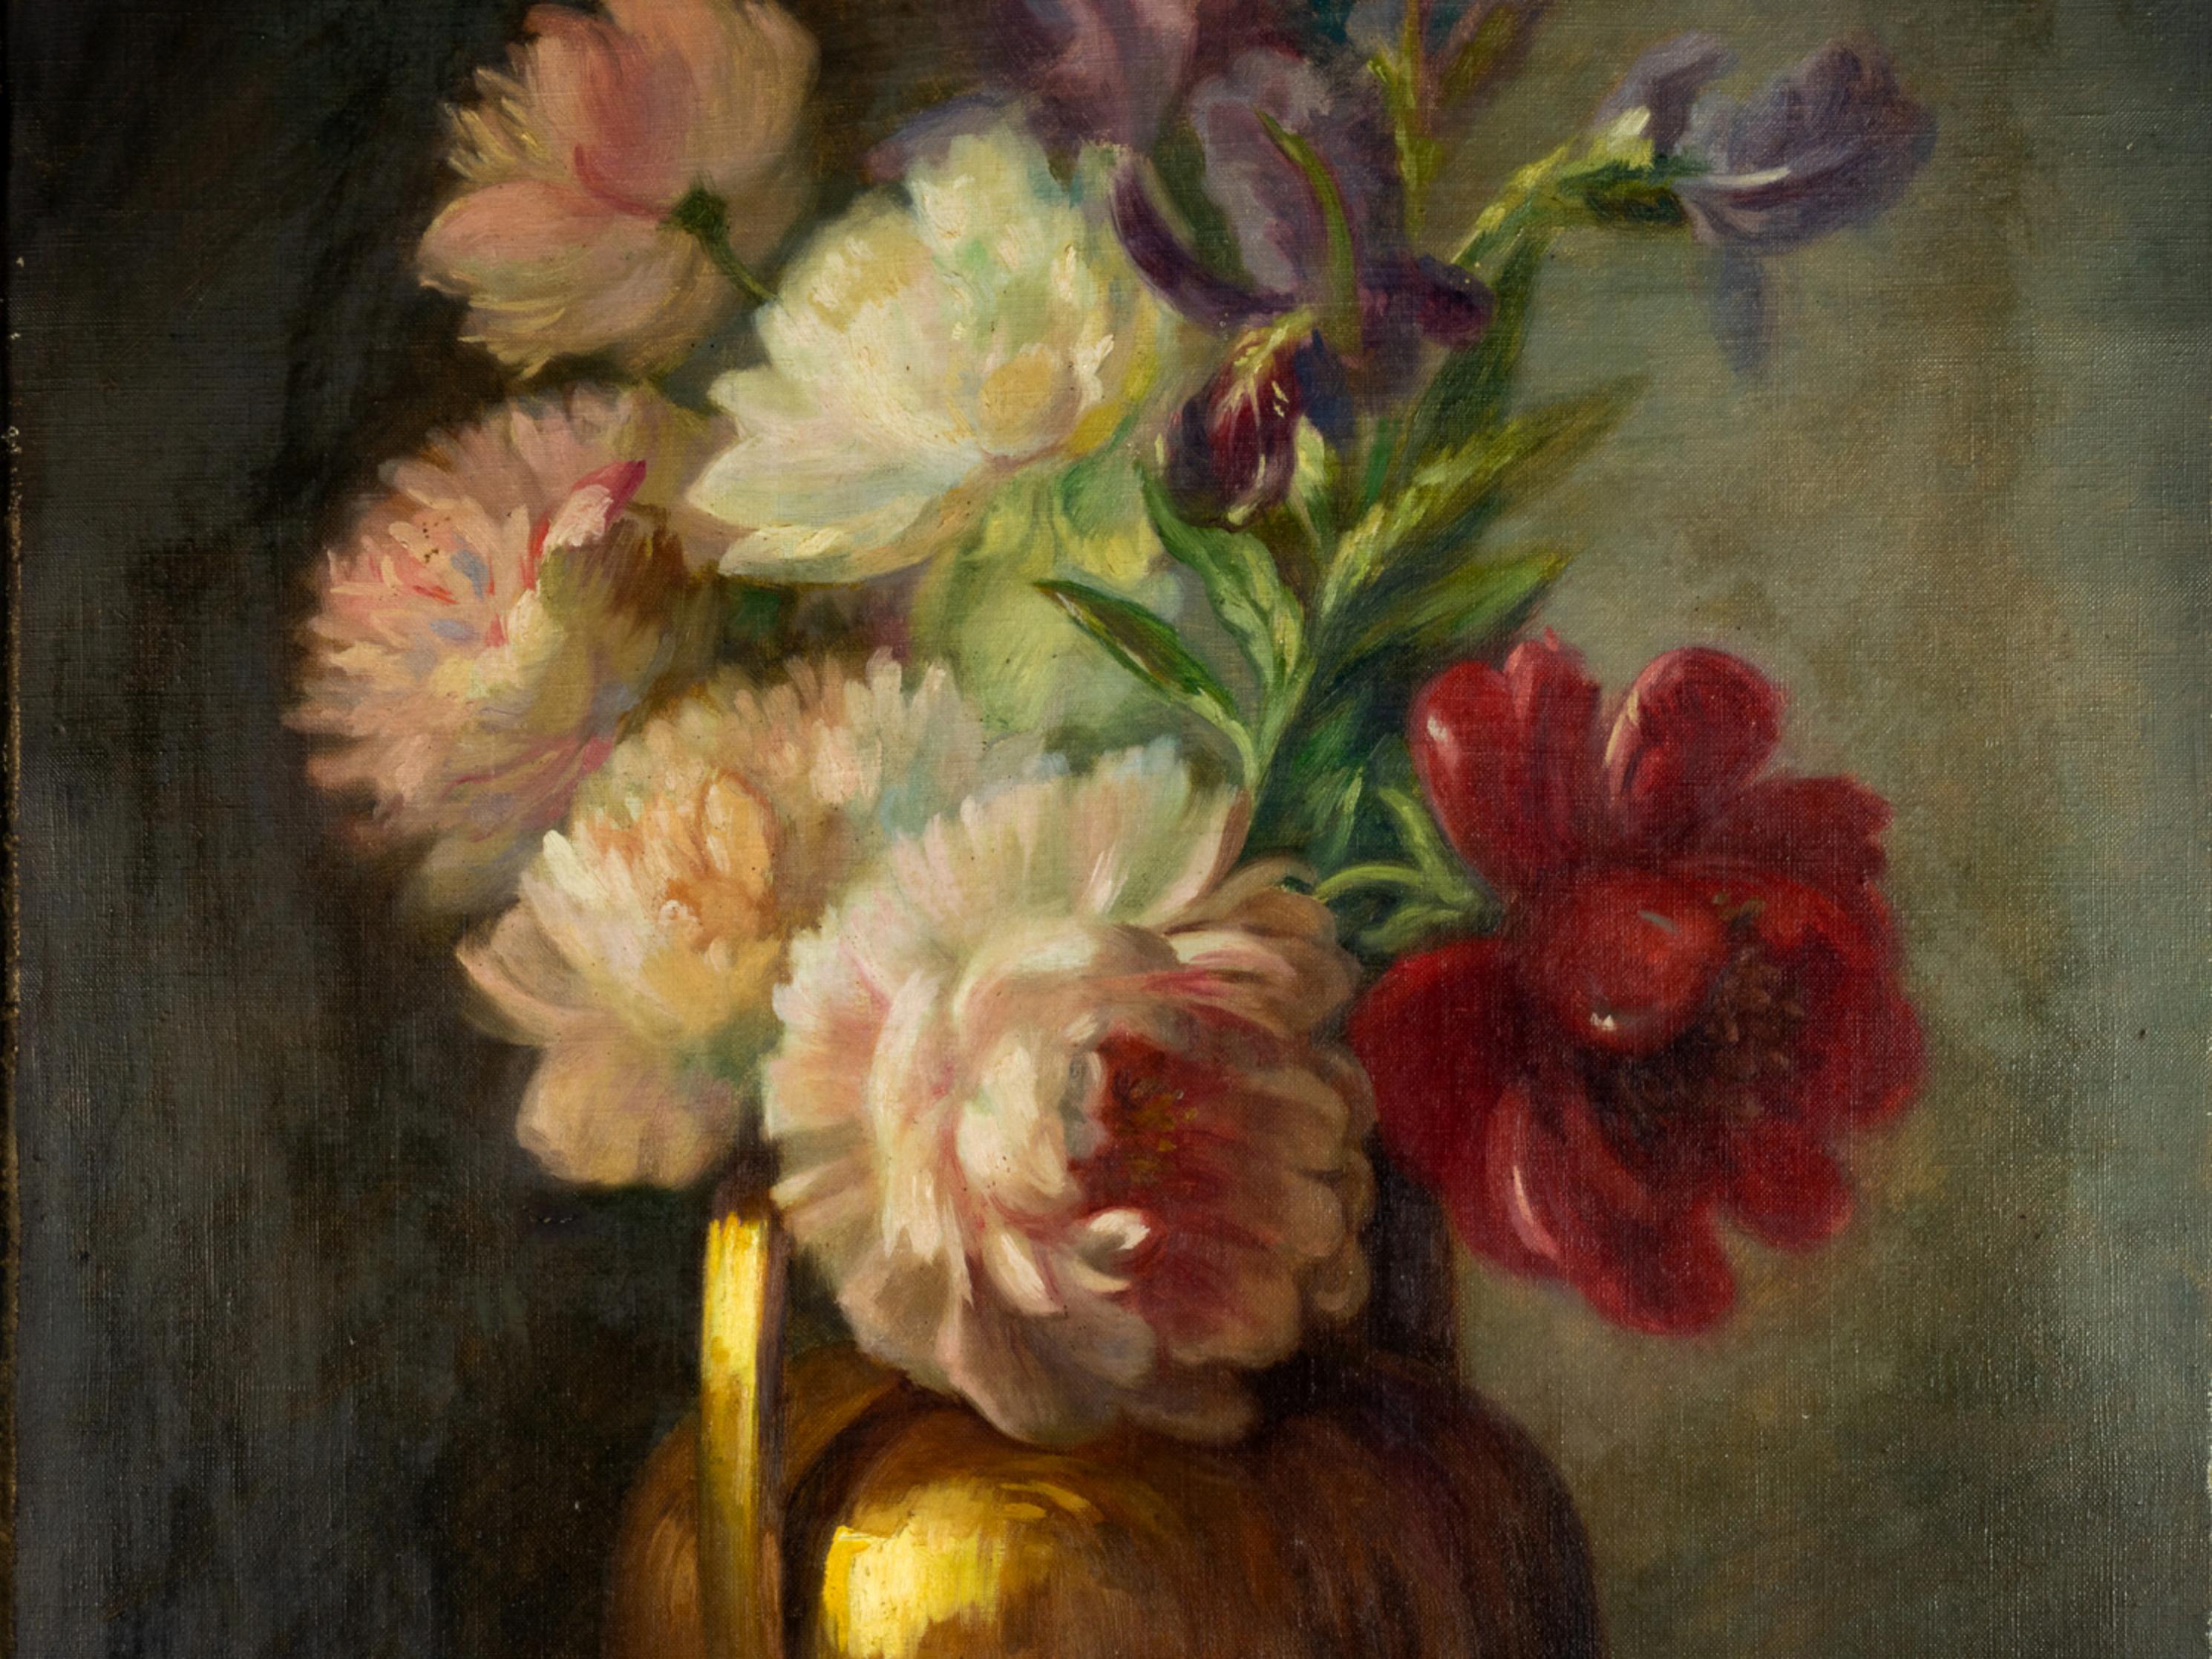 A rare large-scale painting of a still life of flowers, roses, purple lilies and red poppies in a round copper urn, using the sfumato technique to create soft contrasts between tones, signed 